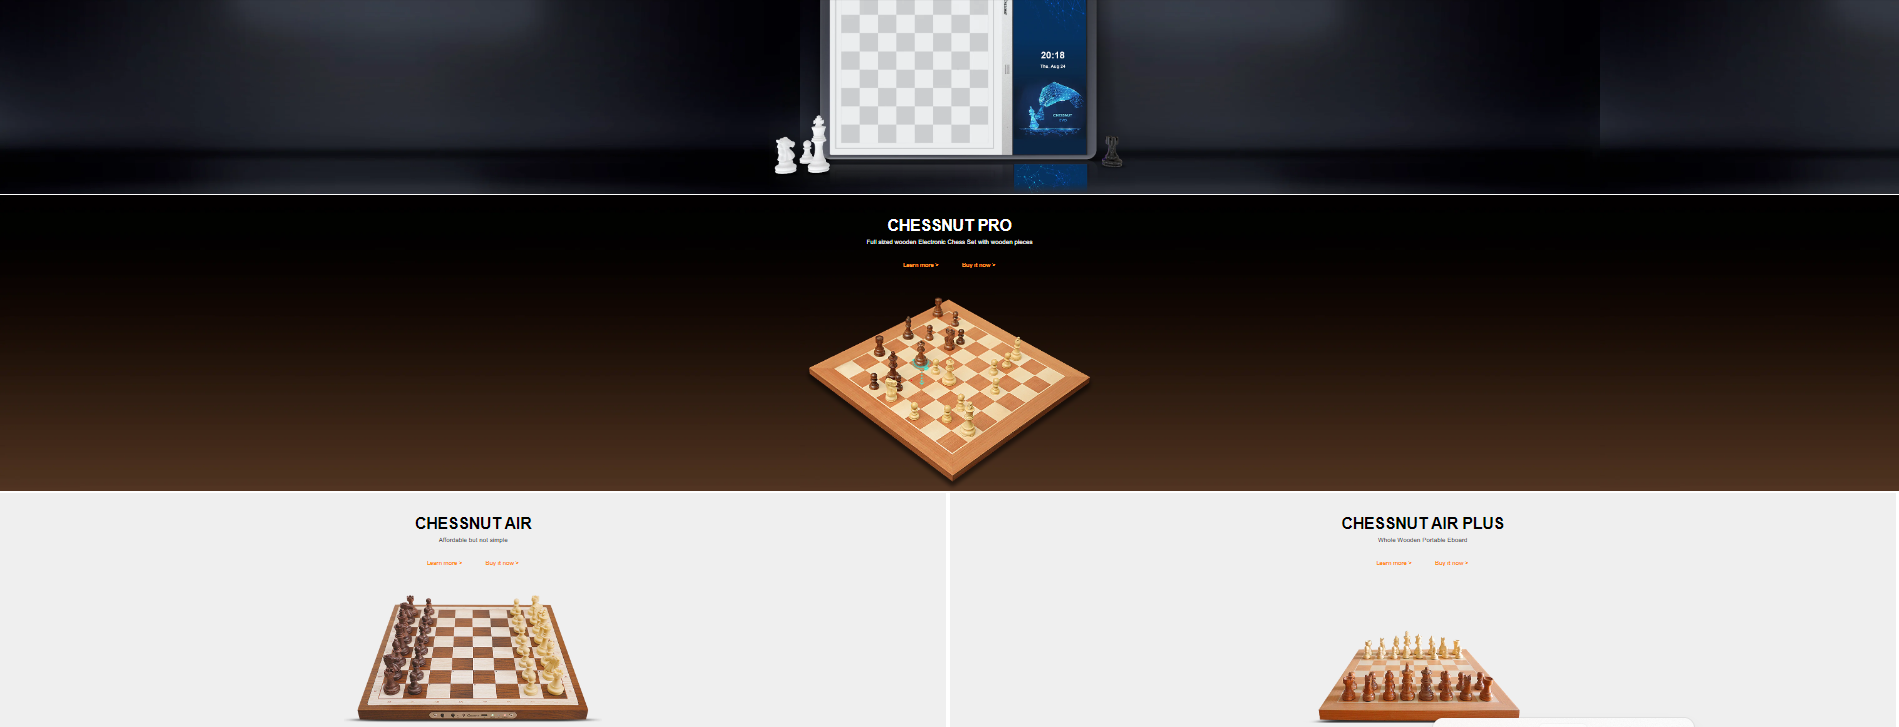 Mastering the Game: Play Chess Online and Elevate Your Skills